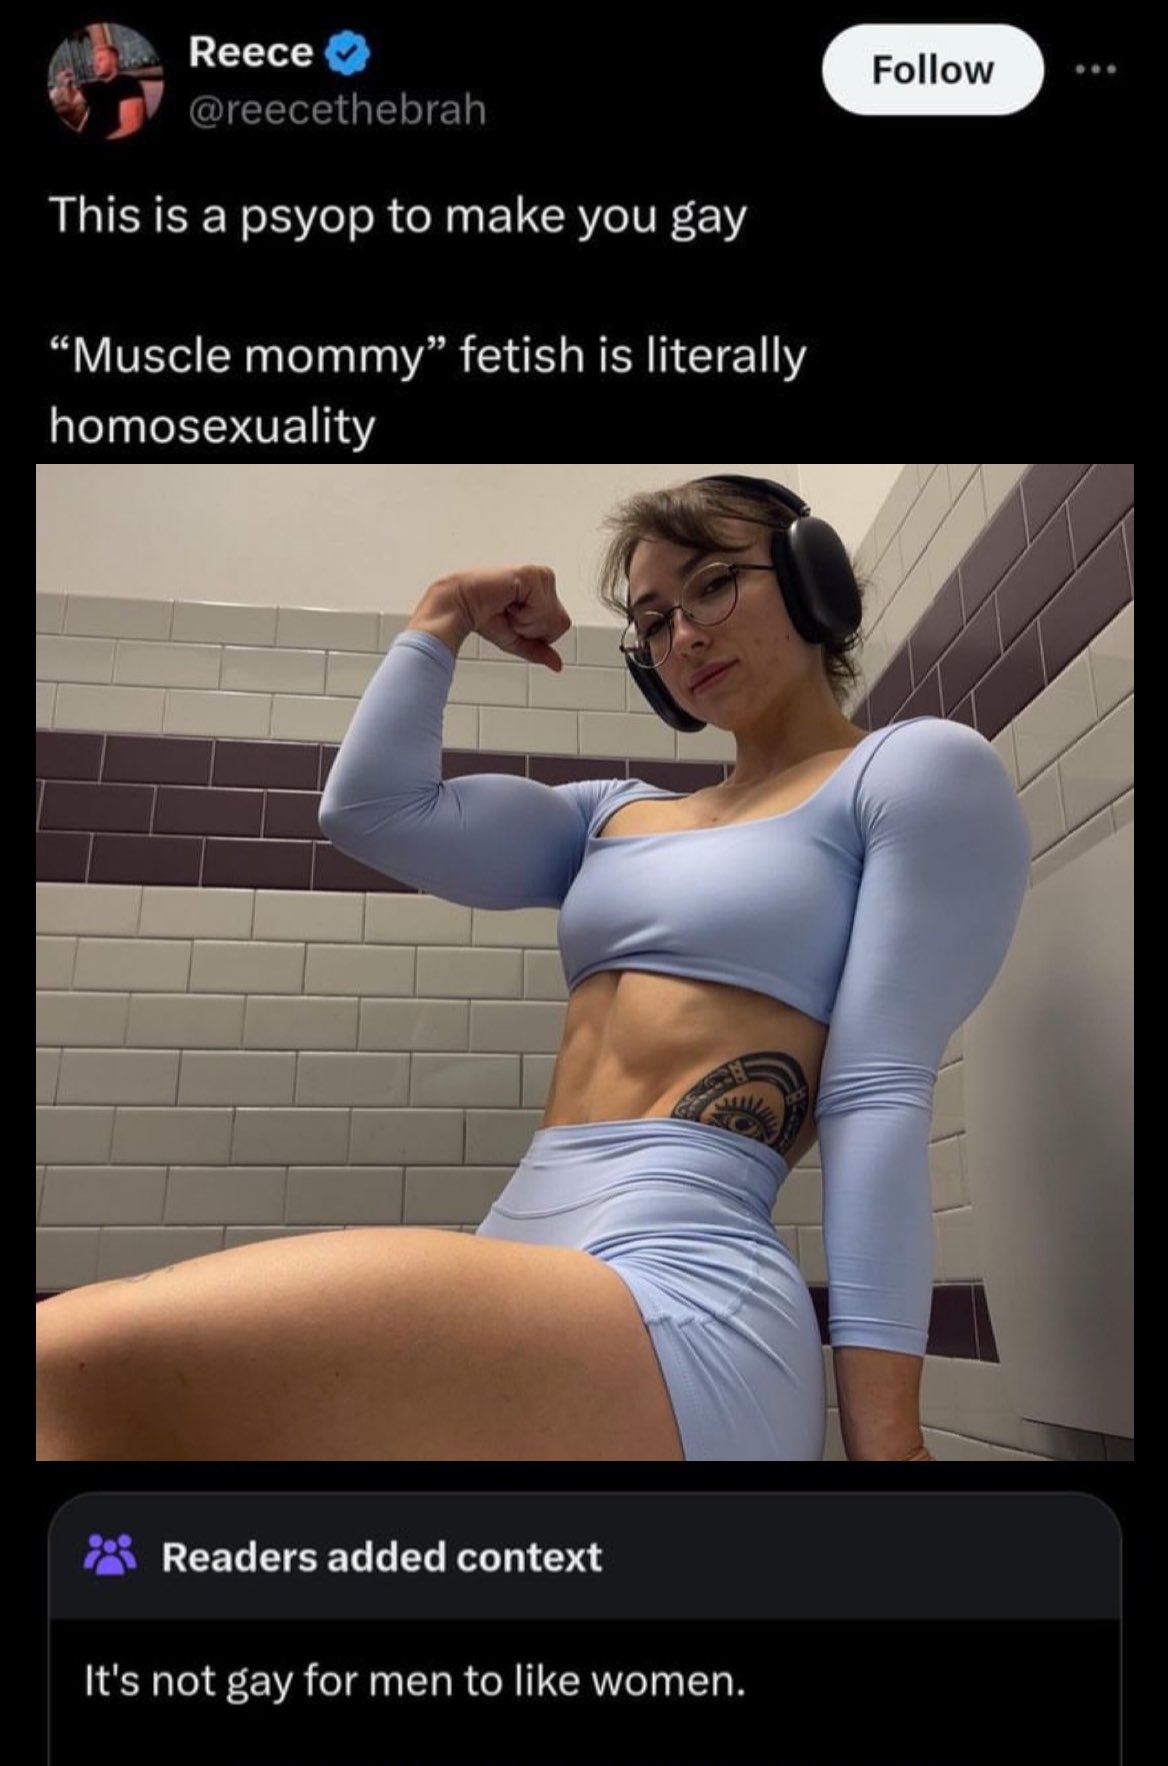 lean beef patty 2024 - Reece This is a psyop to make you gay "Muscle mommy" fetish is literally homosexuality Readers added context It's not gay for men to women.